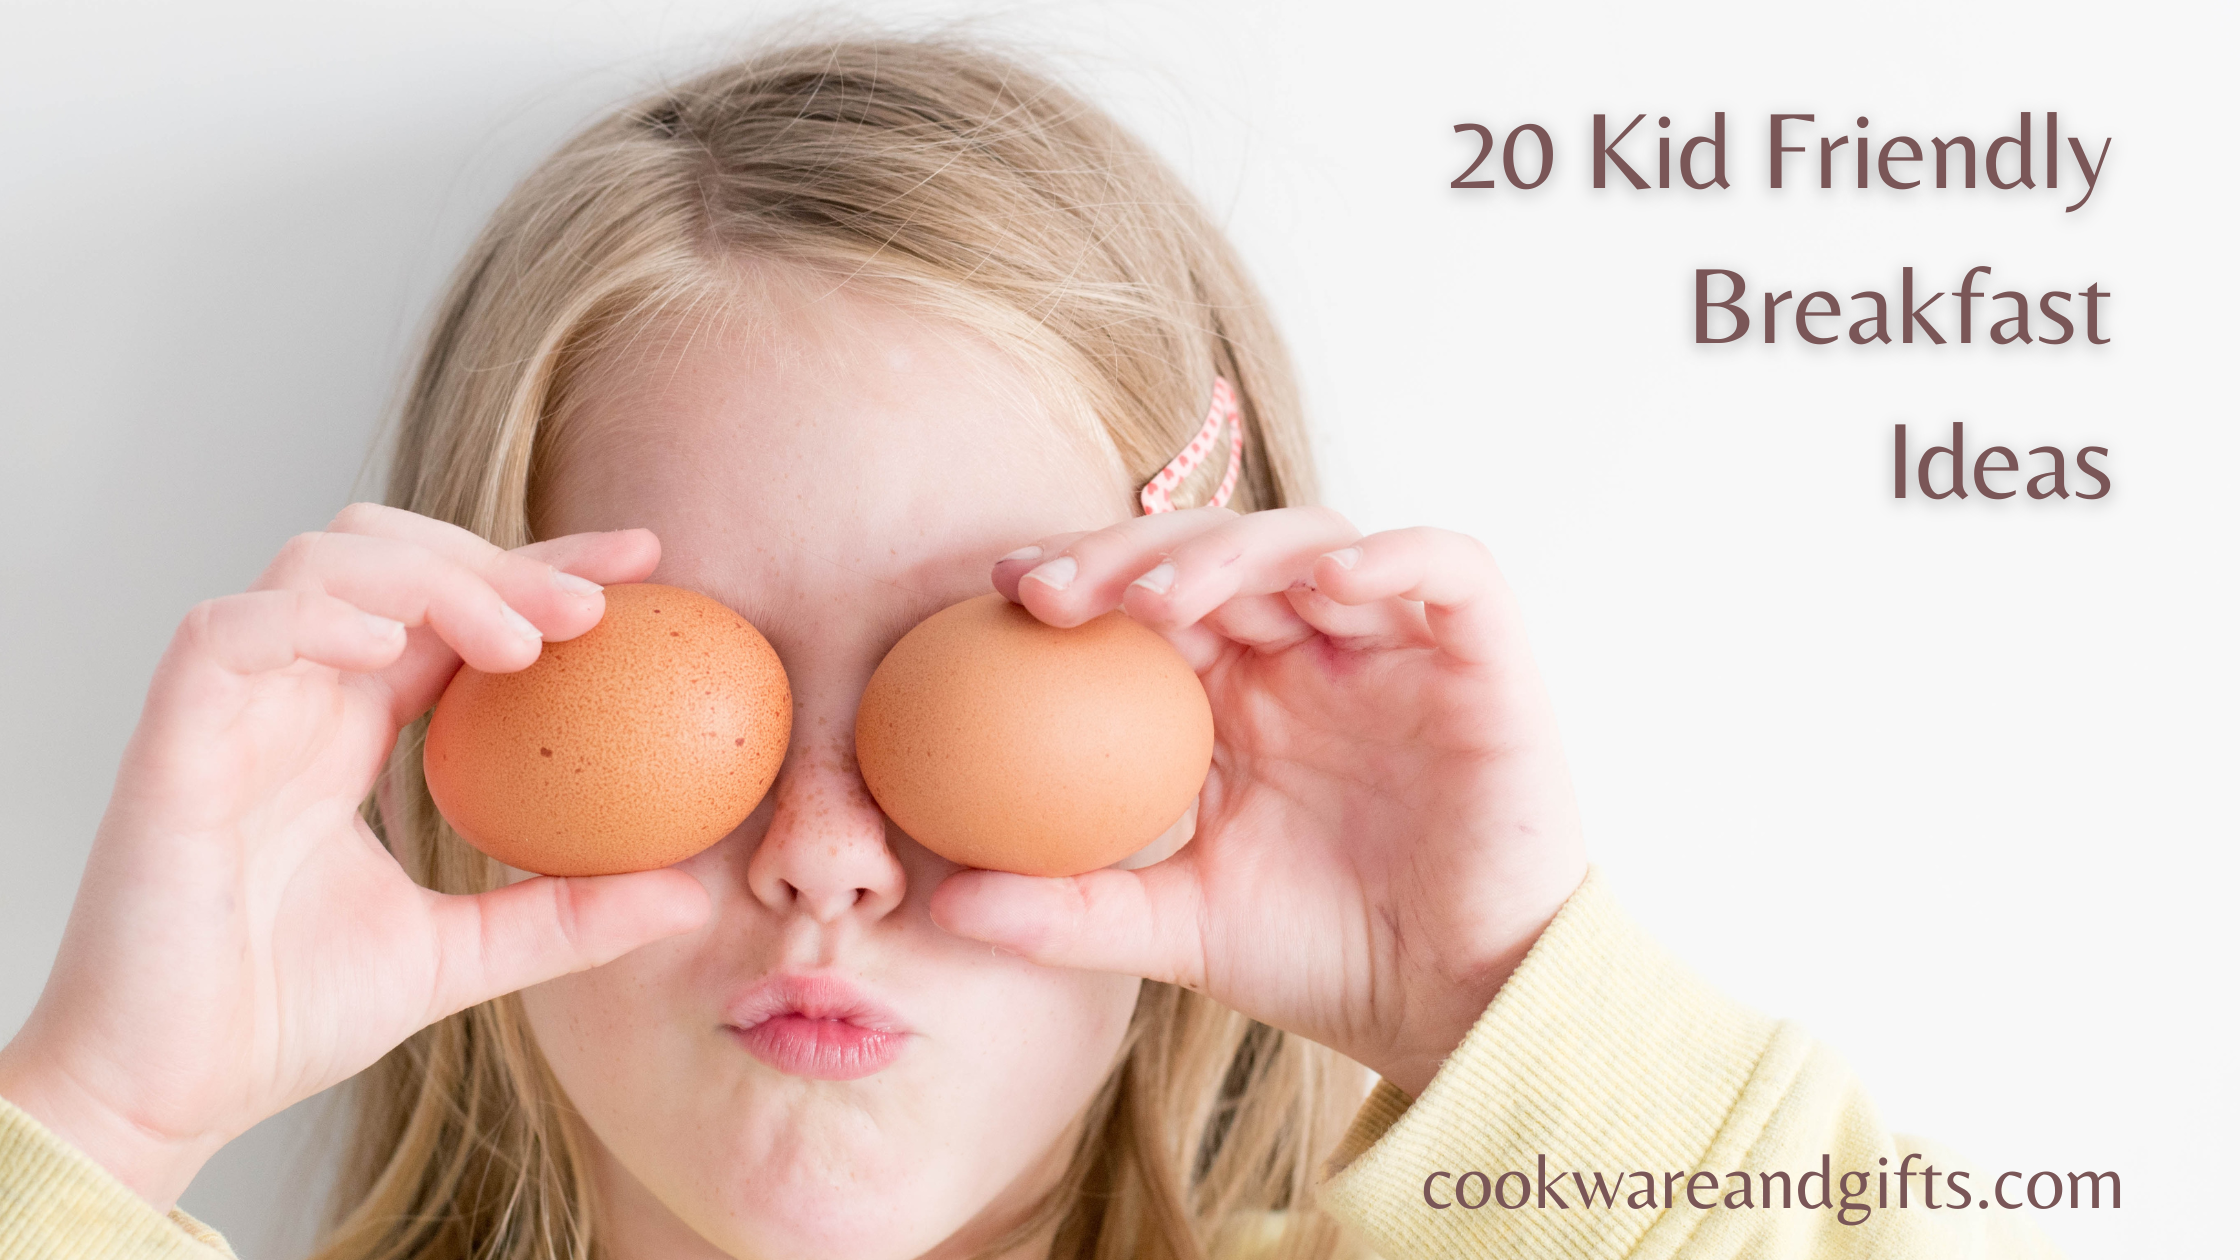 20 Kid Friendly Breakfast Ideas so Quick and Easy You Won’t Even Need a Recipe For Most of Them!